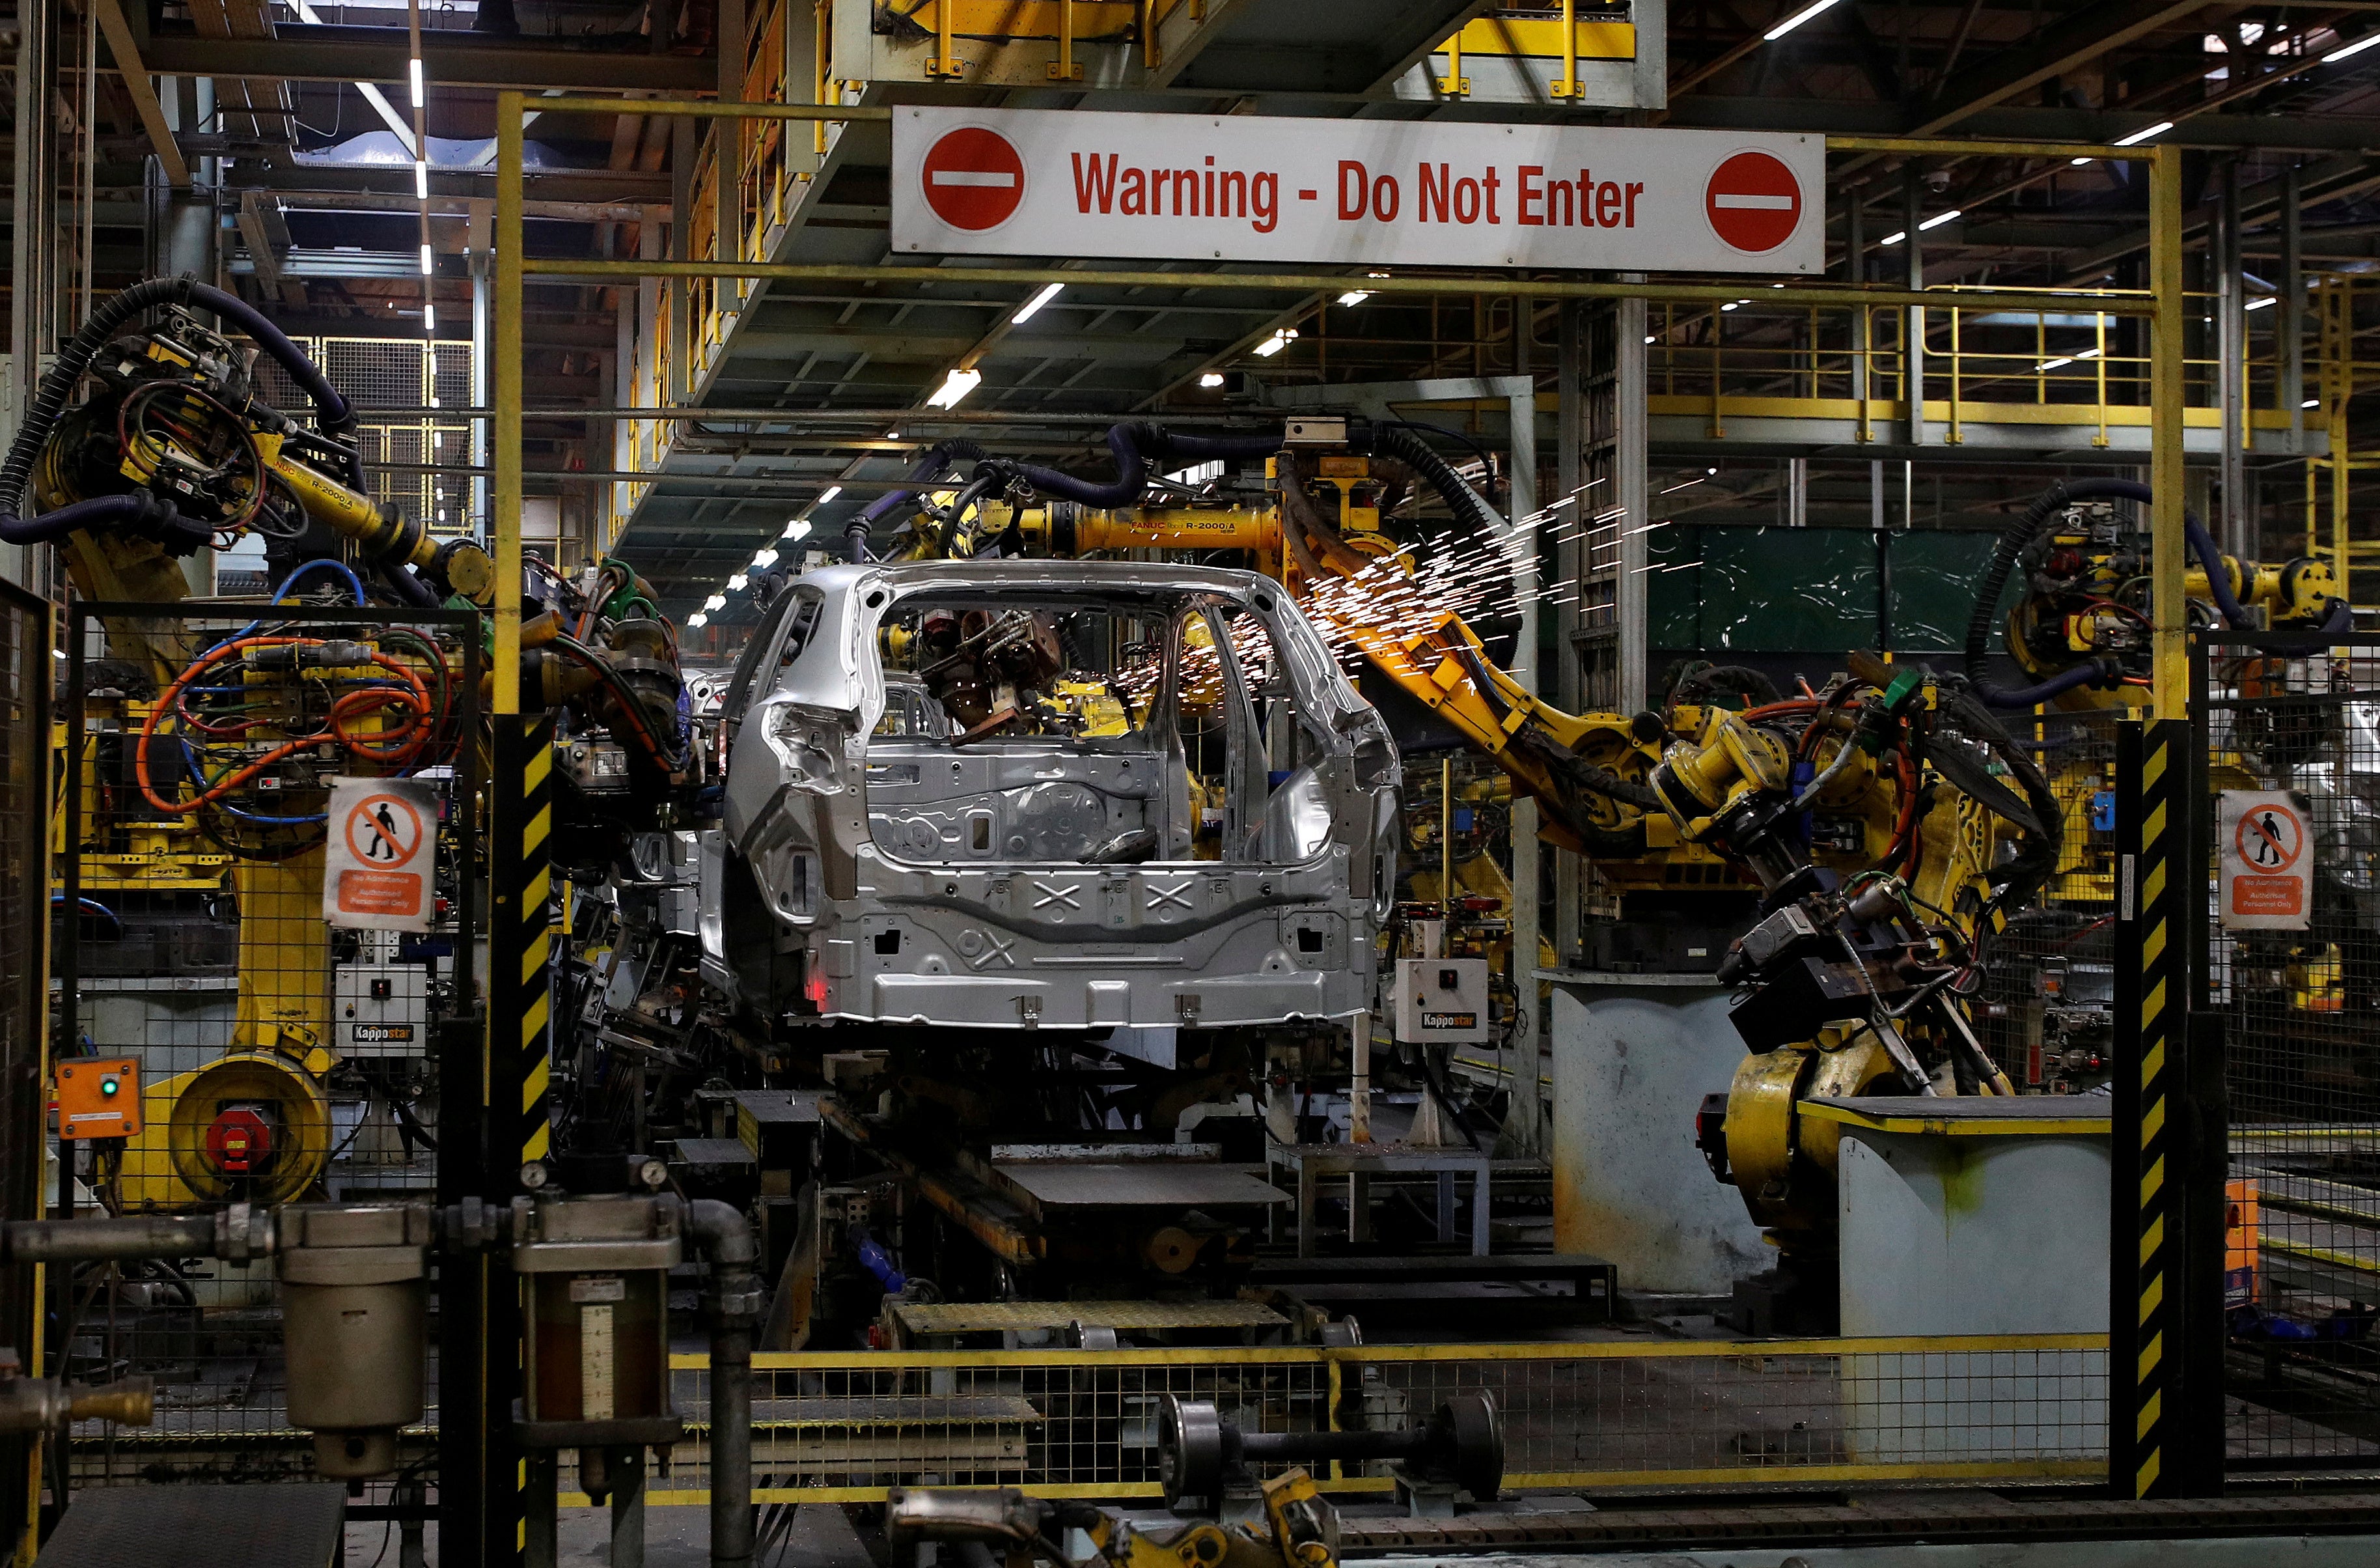 Nissan temporarily closed one of its two UK production lines on Friday due to supply problems